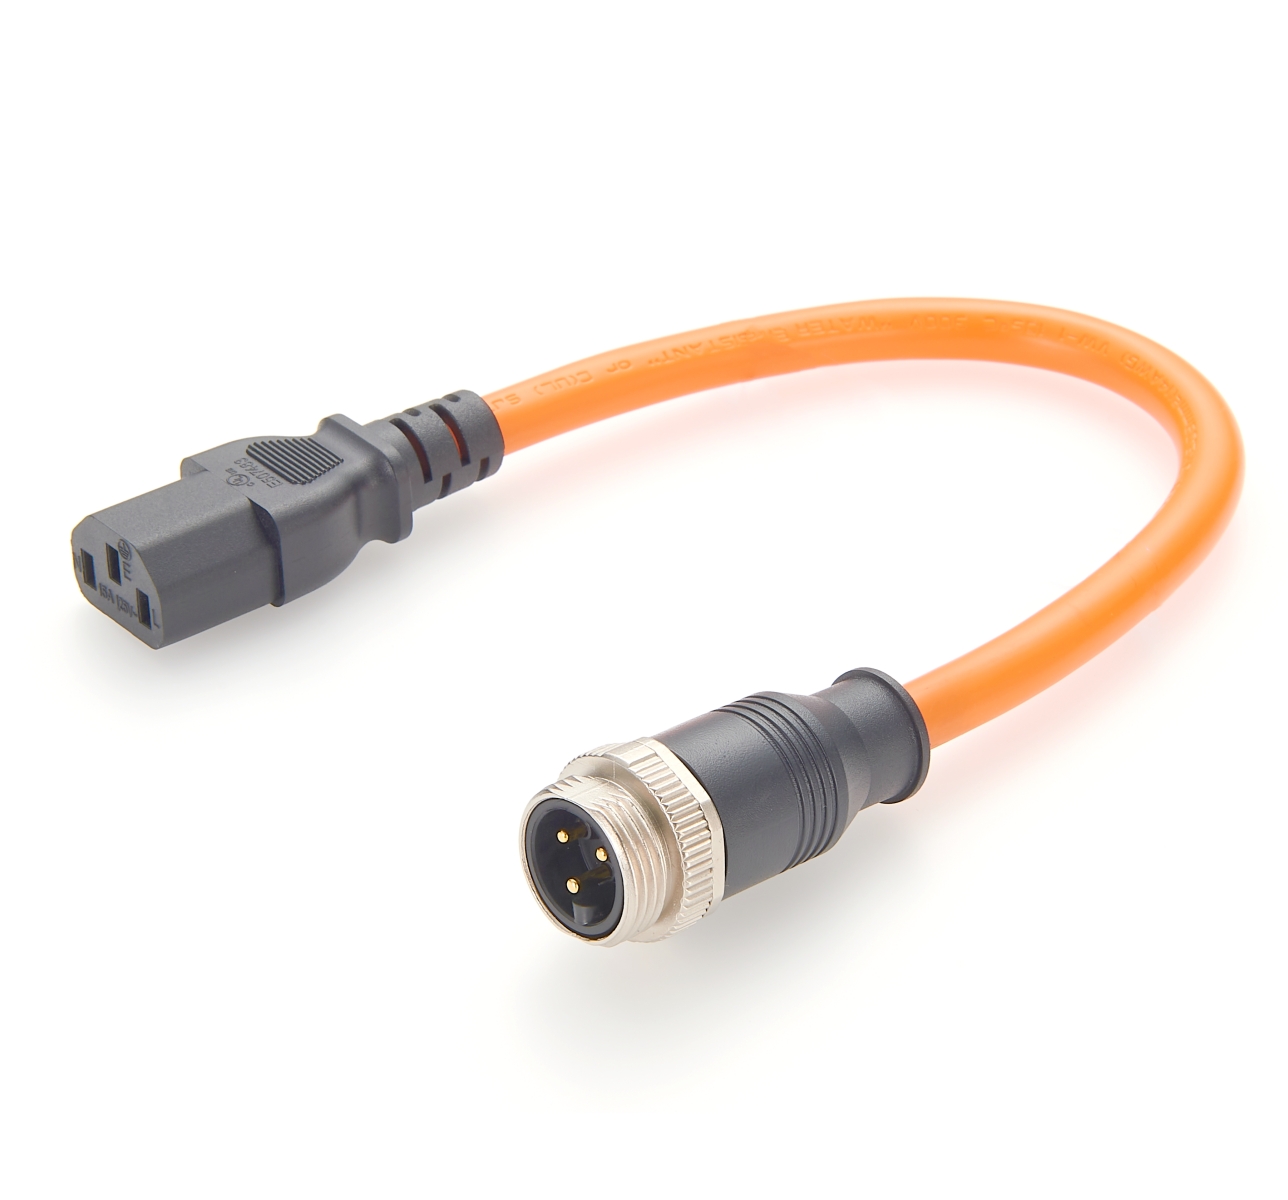 7/8" Circular Connector to IEC C13 Power Cable